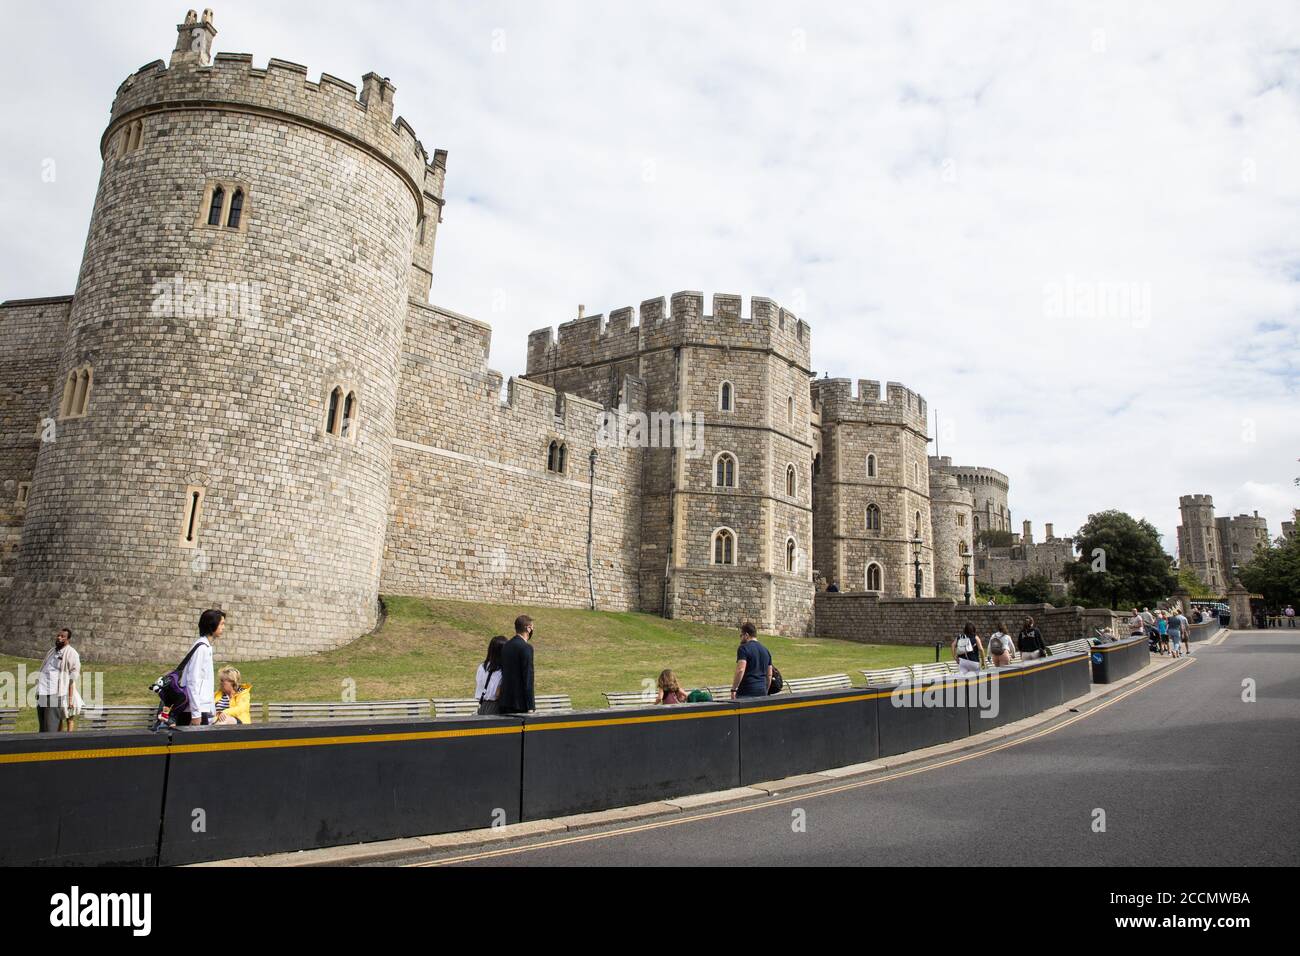 Windsor, UK. 23rd August, 2020. Members of the public arrive to visit Windsor Castle. The Sunday Times has reported that the Queen will make Windsor Castle her main home for the rest of the year following her summer break at Balmoral rather than returning to Buckingham Palace because her household arrangements at Windsor Castle are believed to offer the greatest protection from COVID-19.  Credit: Mark Kerrison/Alamy Live News Stock Photo